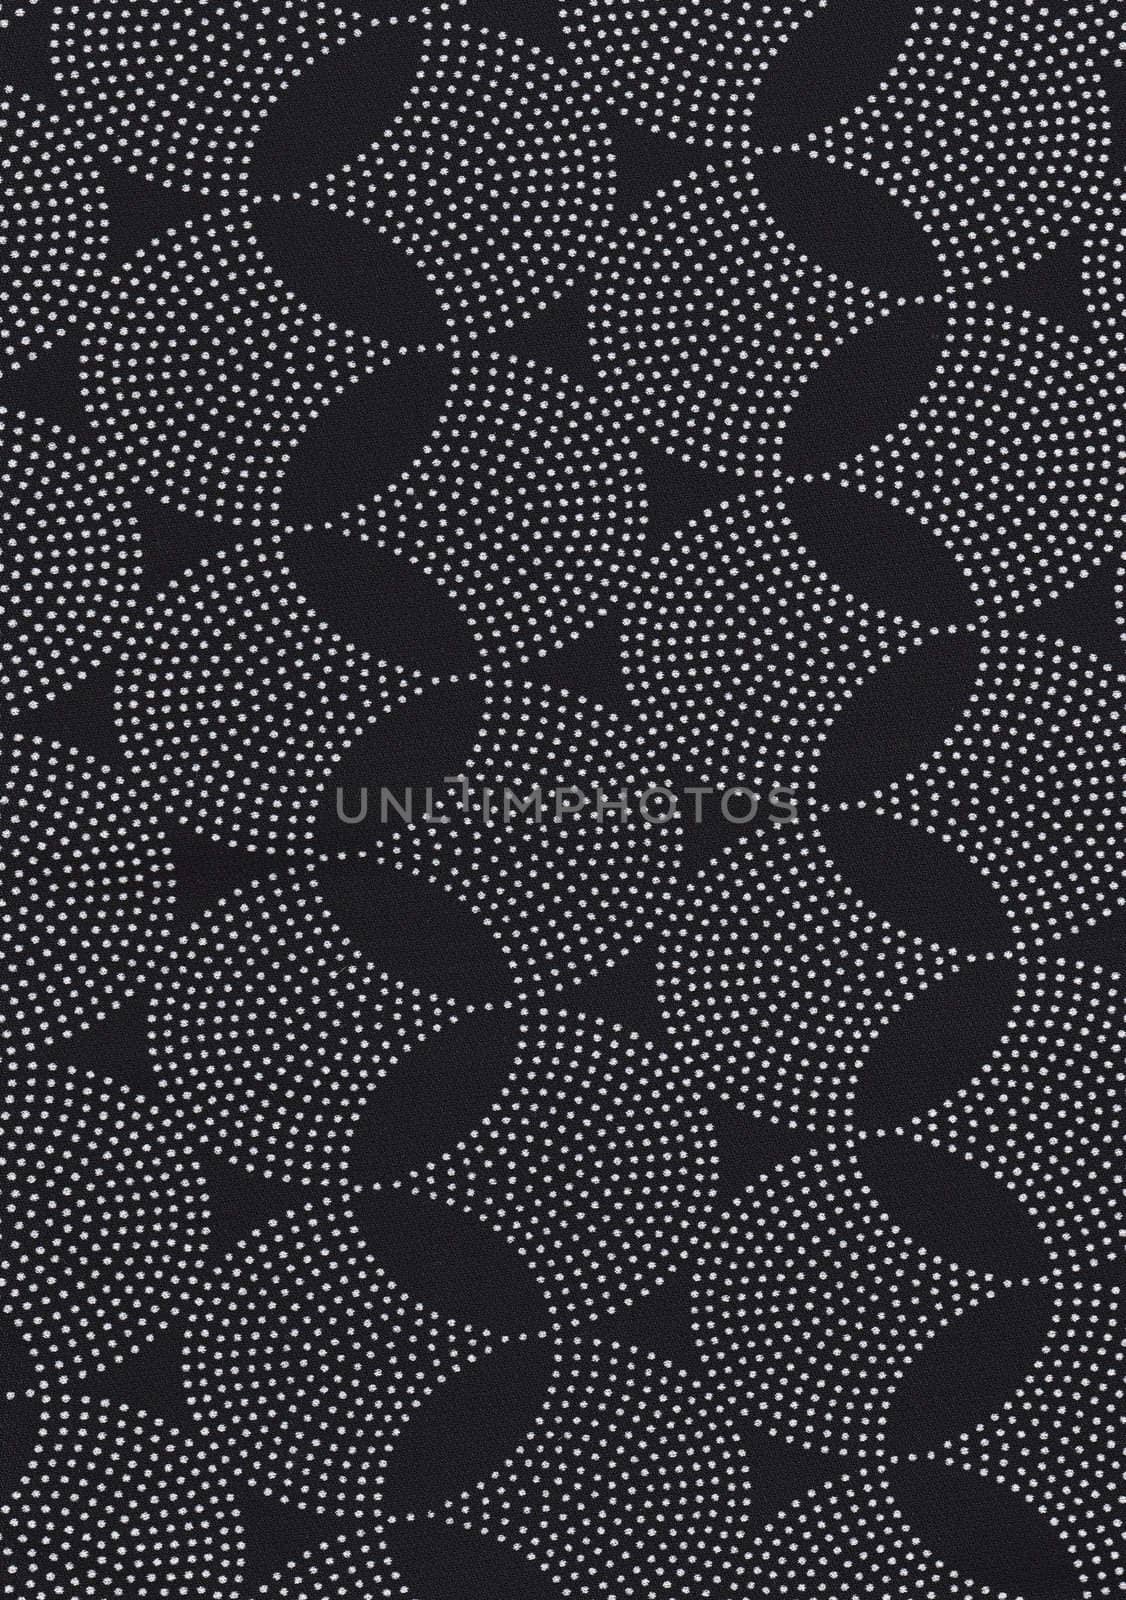 black and silver texture fabric design shape round pattern backg by jeremywhat